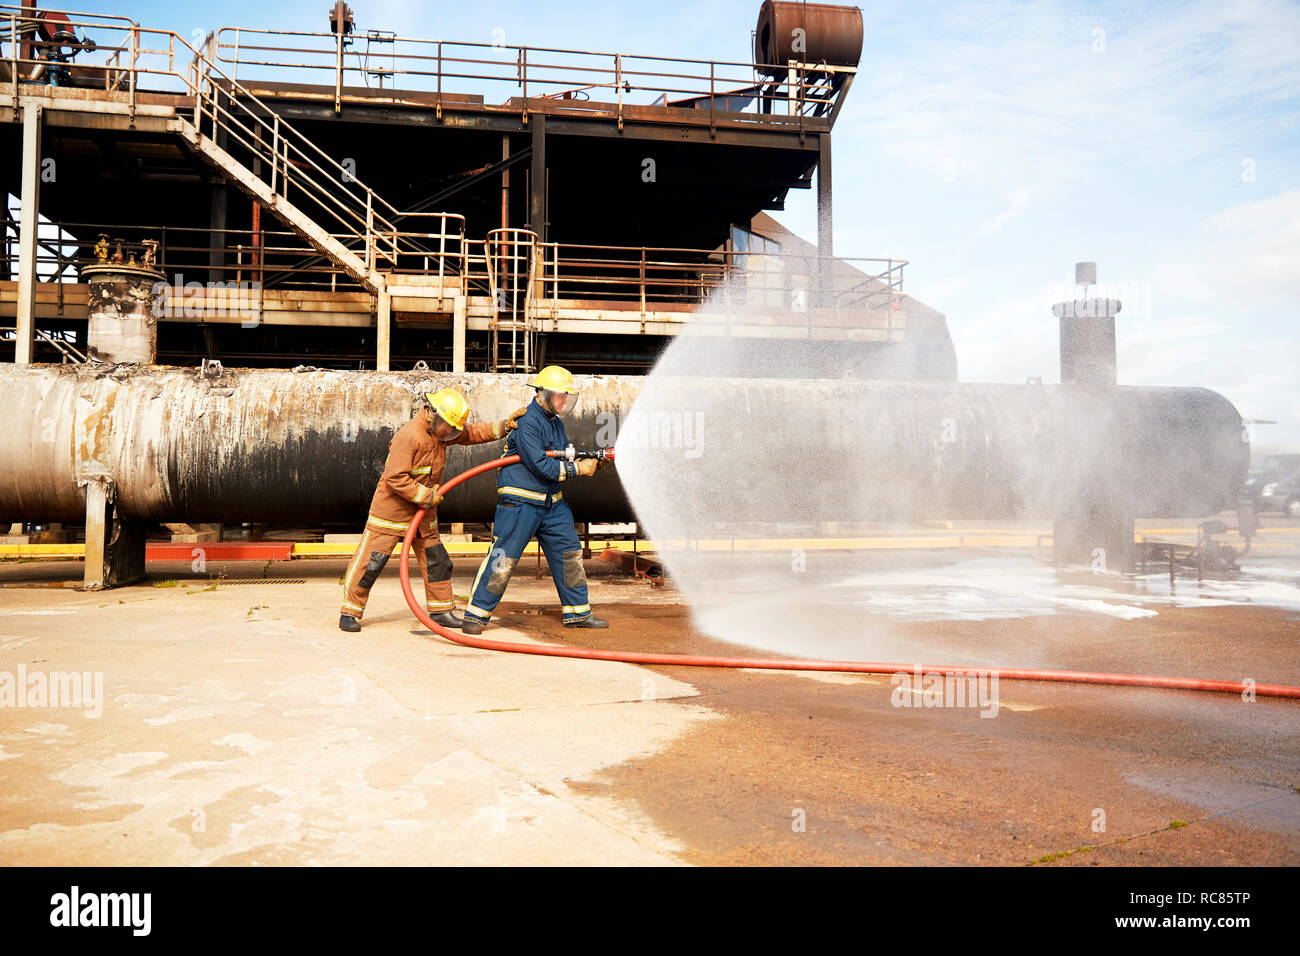 Firemen training, firemen spraying water from fire hose at training facility Stock Photo